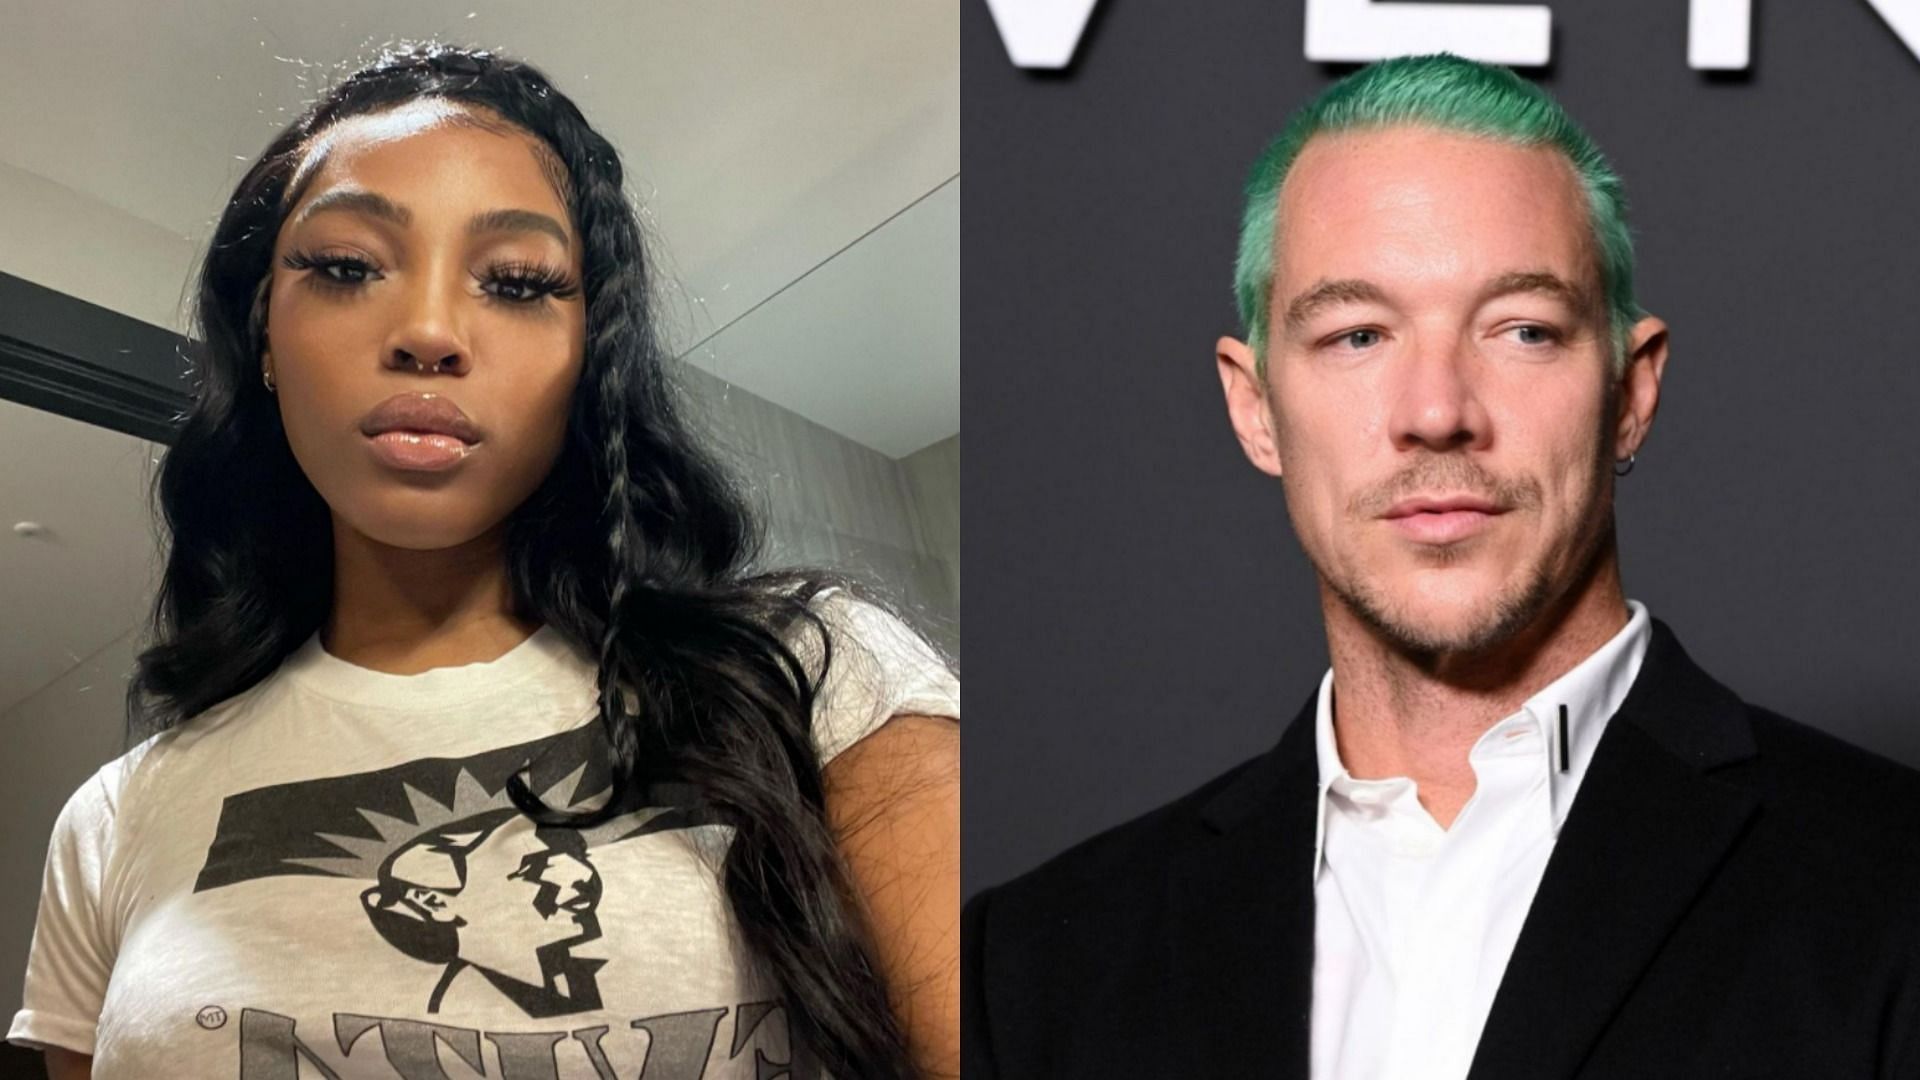 Quen Blackwell reignited rumors of Diplo grooming her (Image via quenblackwell and diplo/Instagram)